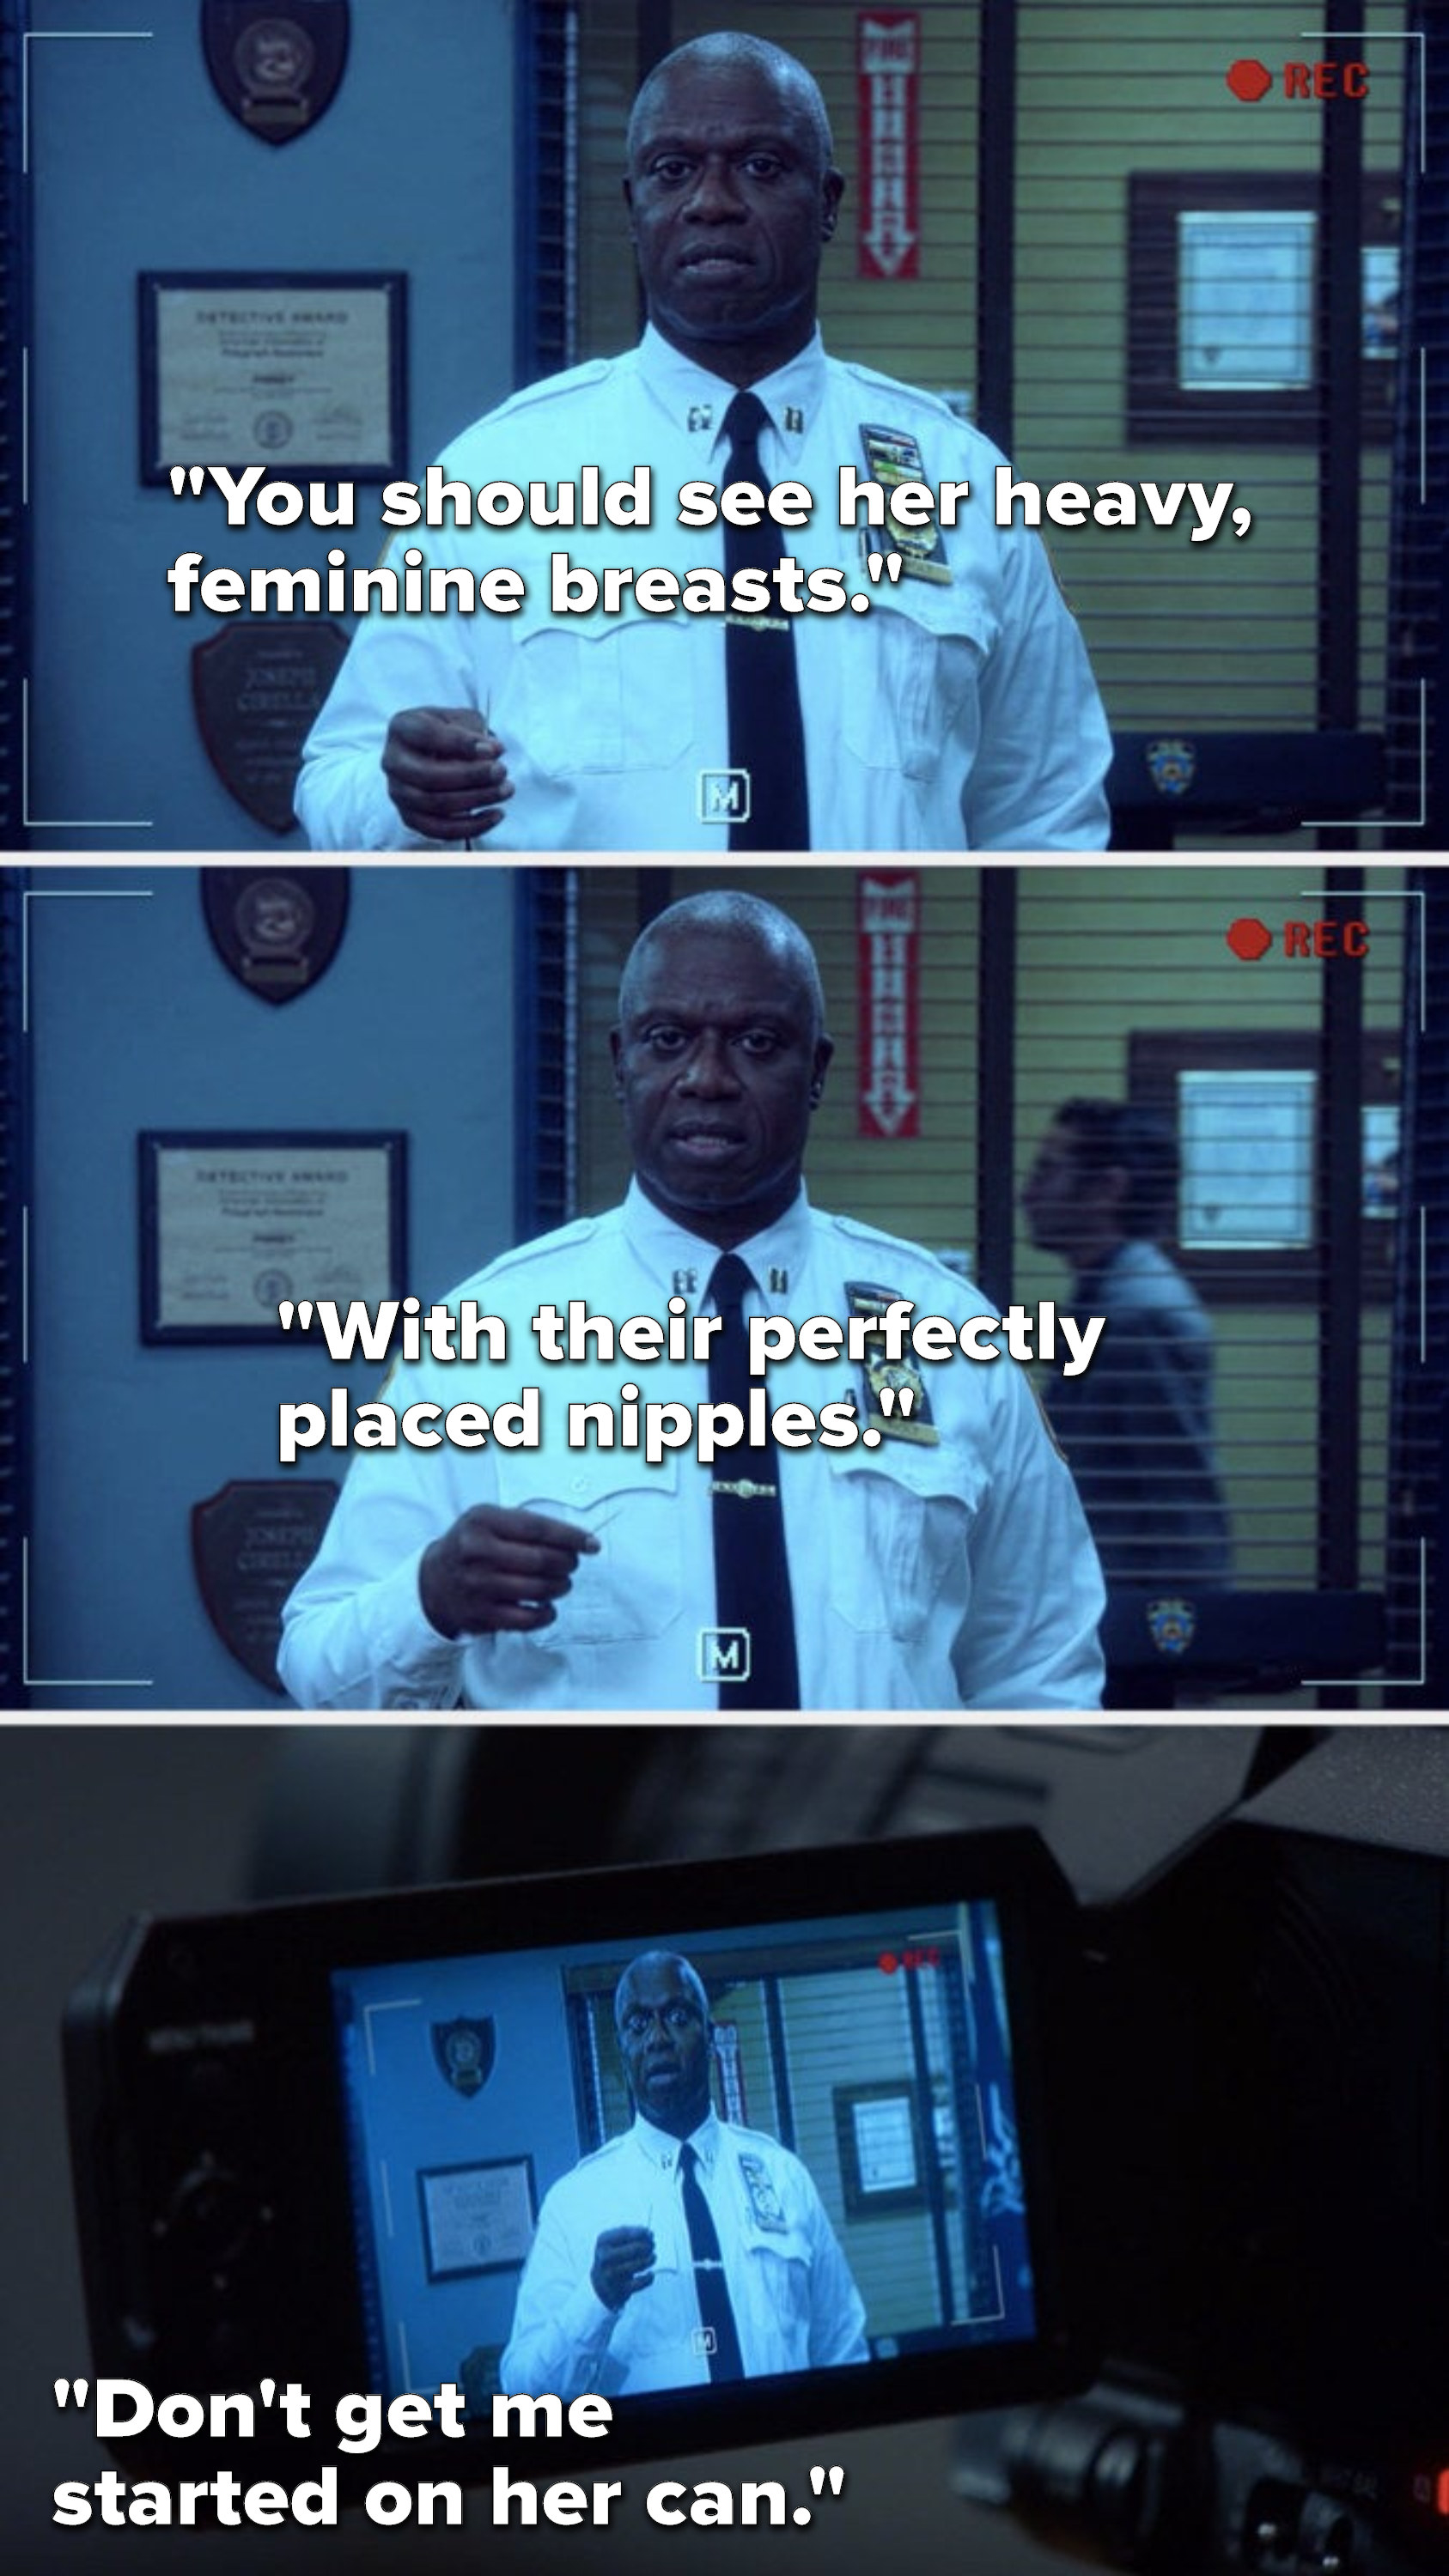 Holt says, &quot;You should see her heavy, feminine breasts, with their perfectly placed nipples, don&#x27;t get me started on her can&quot;